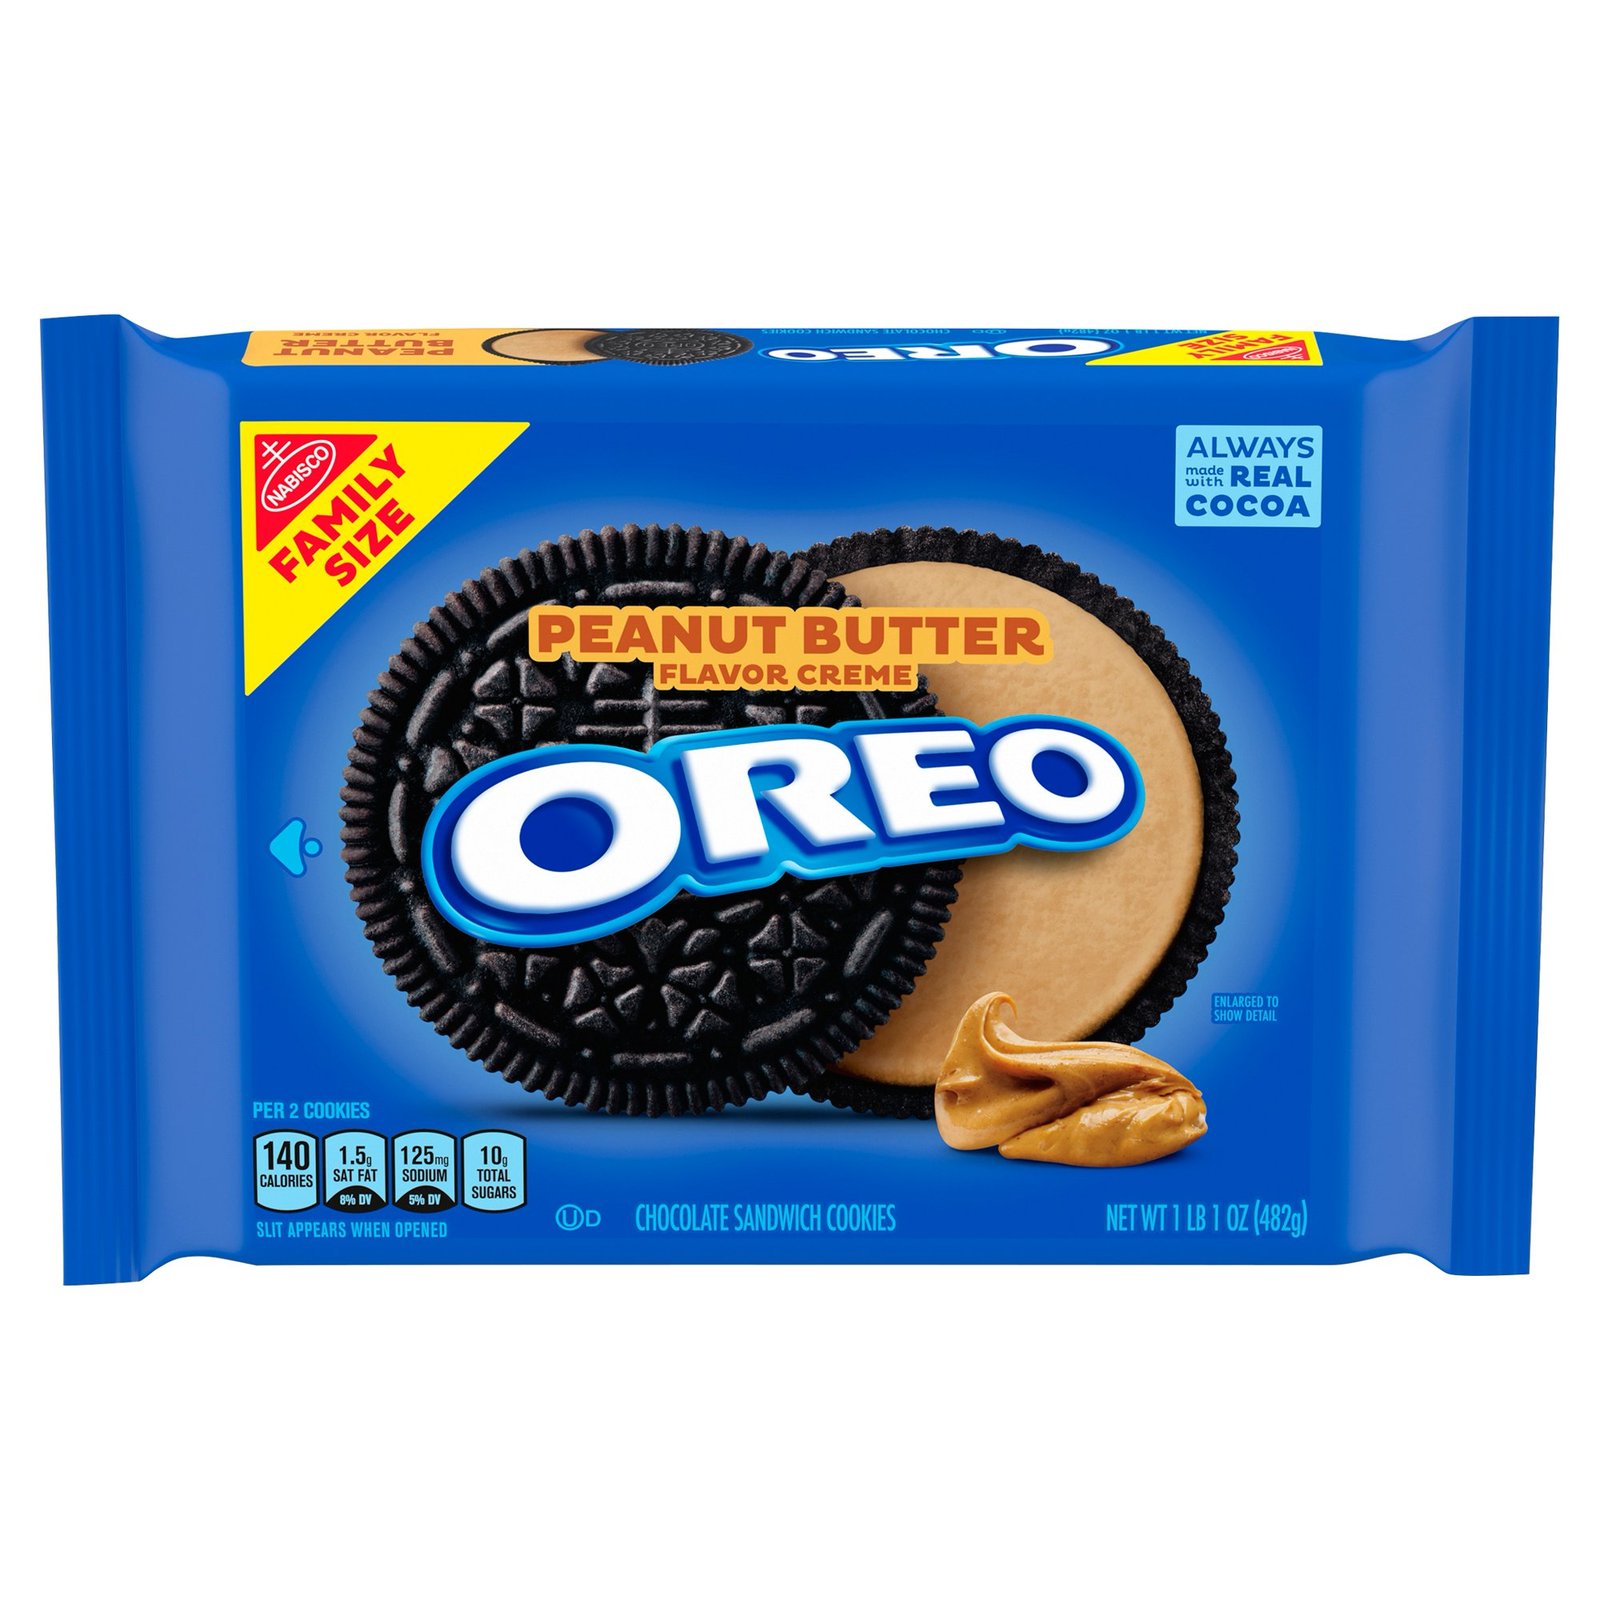 OREO Peanut Butter Creme Chocolate Sandwich Cookies Family Size Pack - 17 oz.